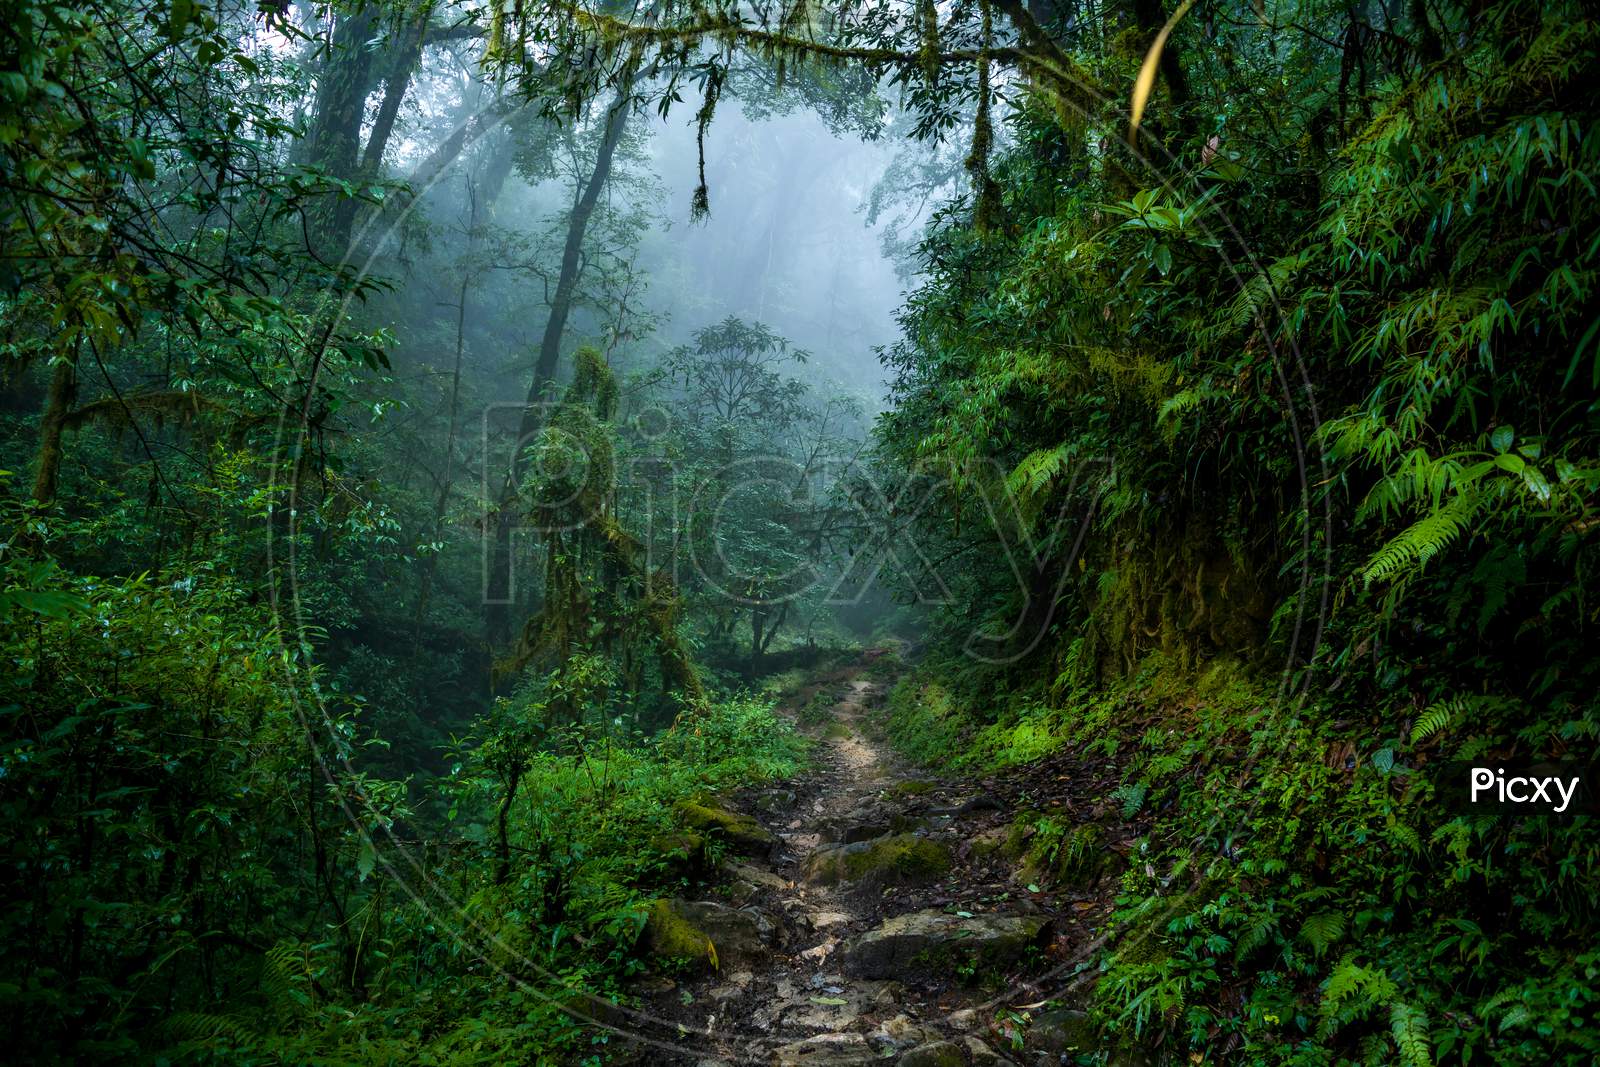 The Foggy Forest, Sikkim, India